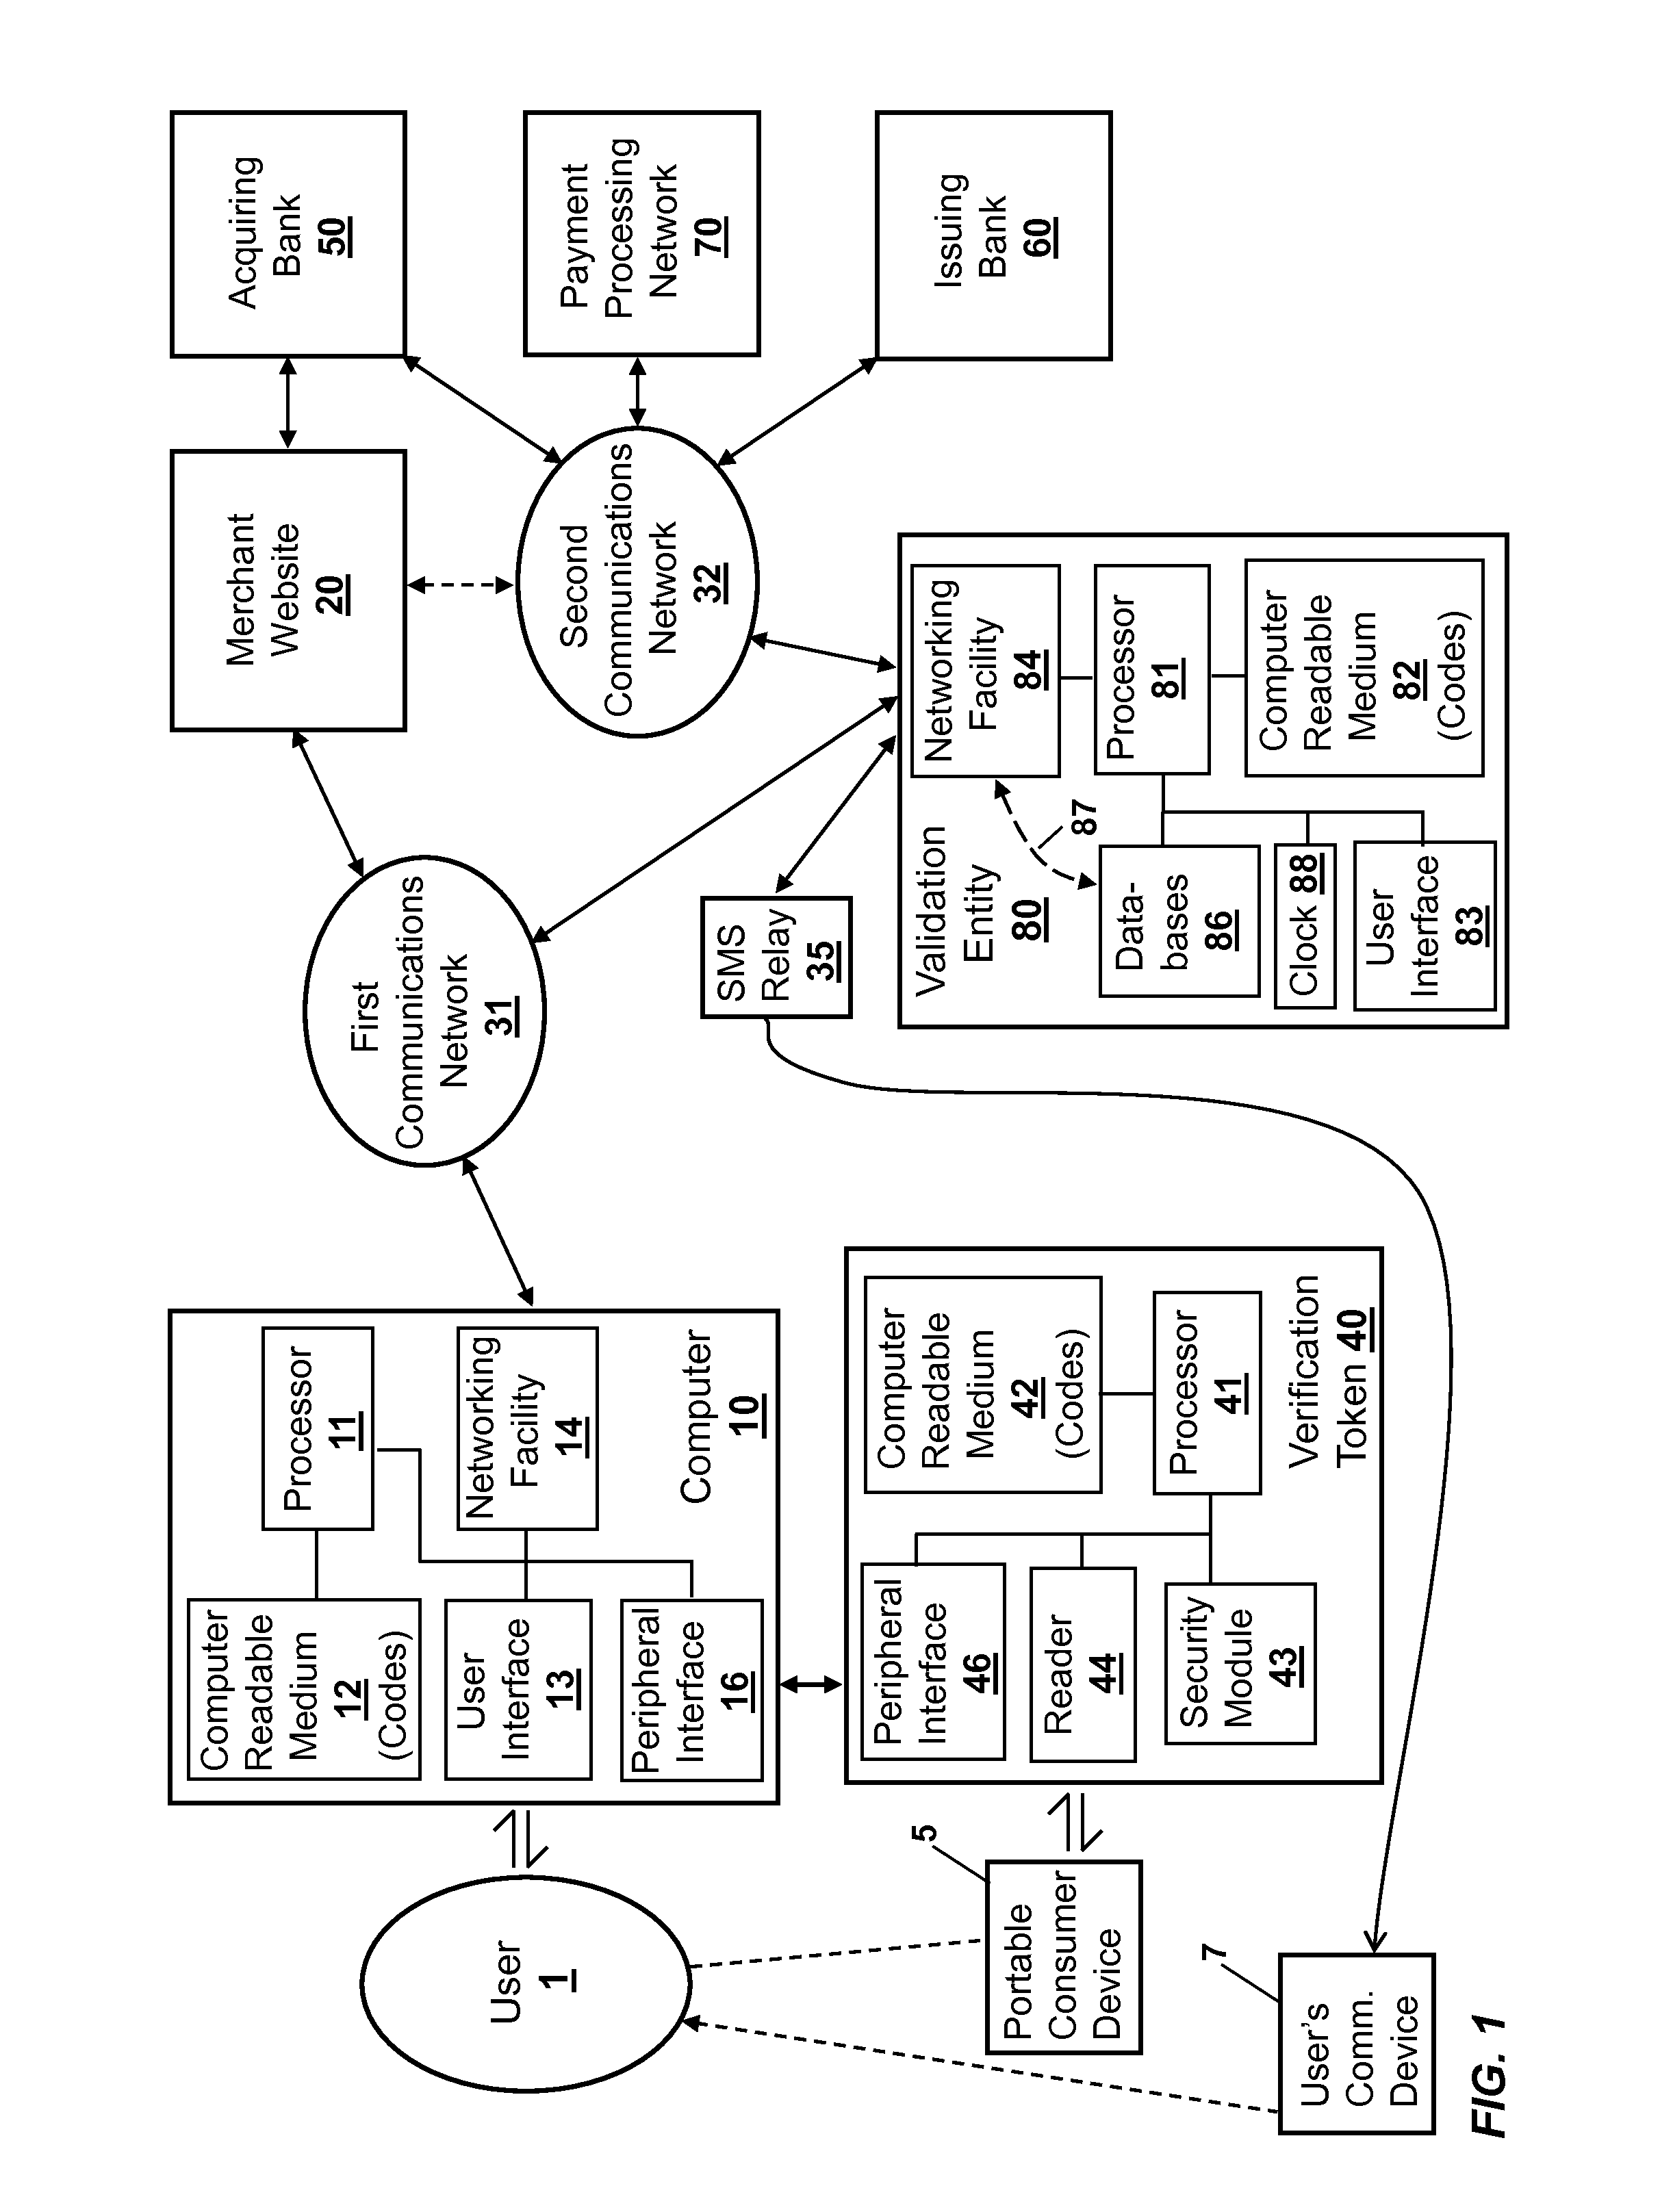 Integration of verification tokens with mobile communication devices